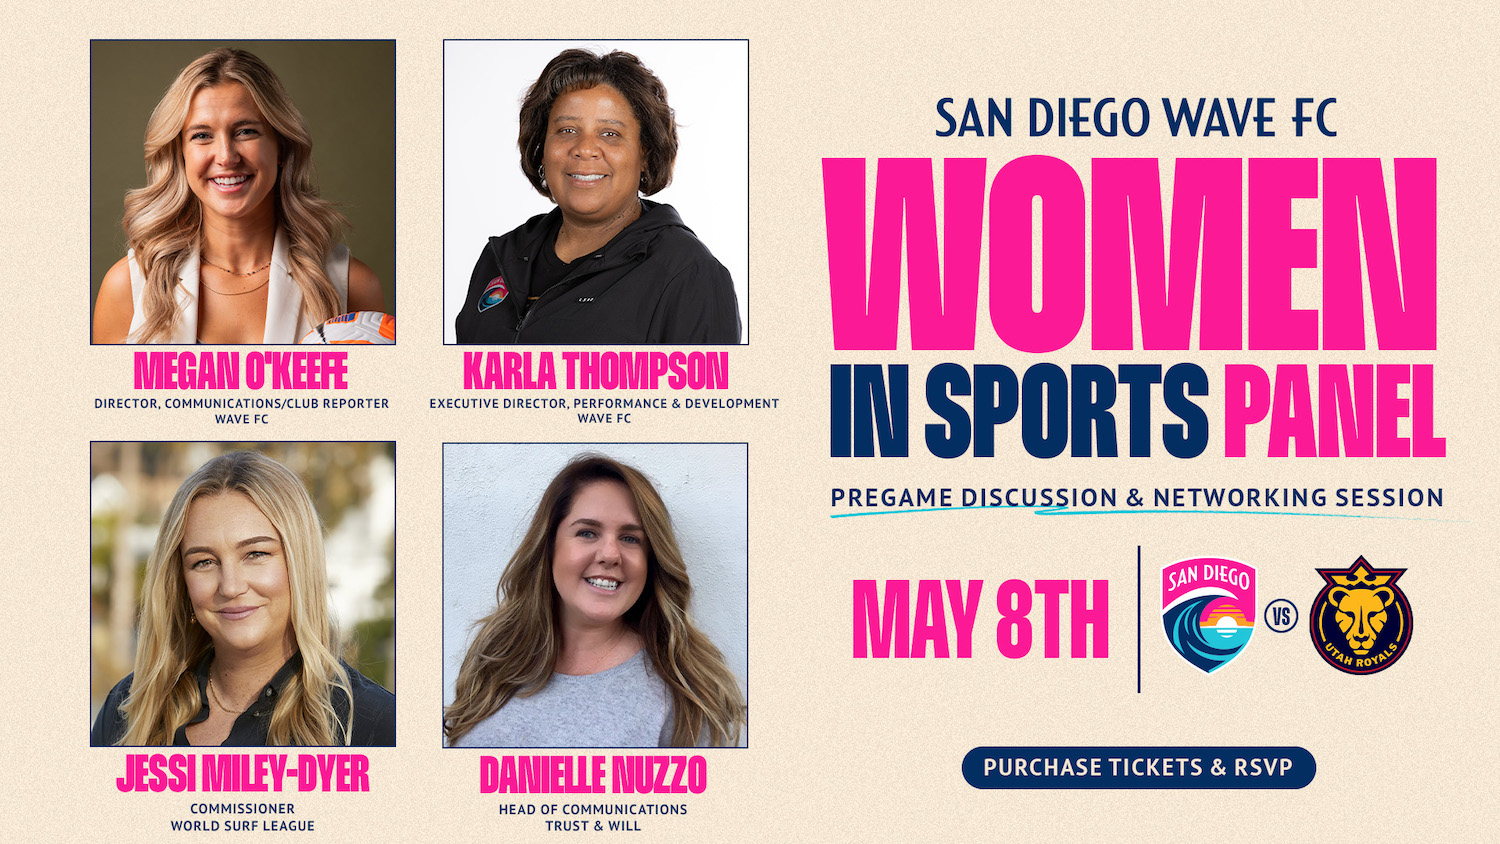 San Diego Wave FC's Women In Sports & Events panel on May 8th before a soccer game against the Utah Royals